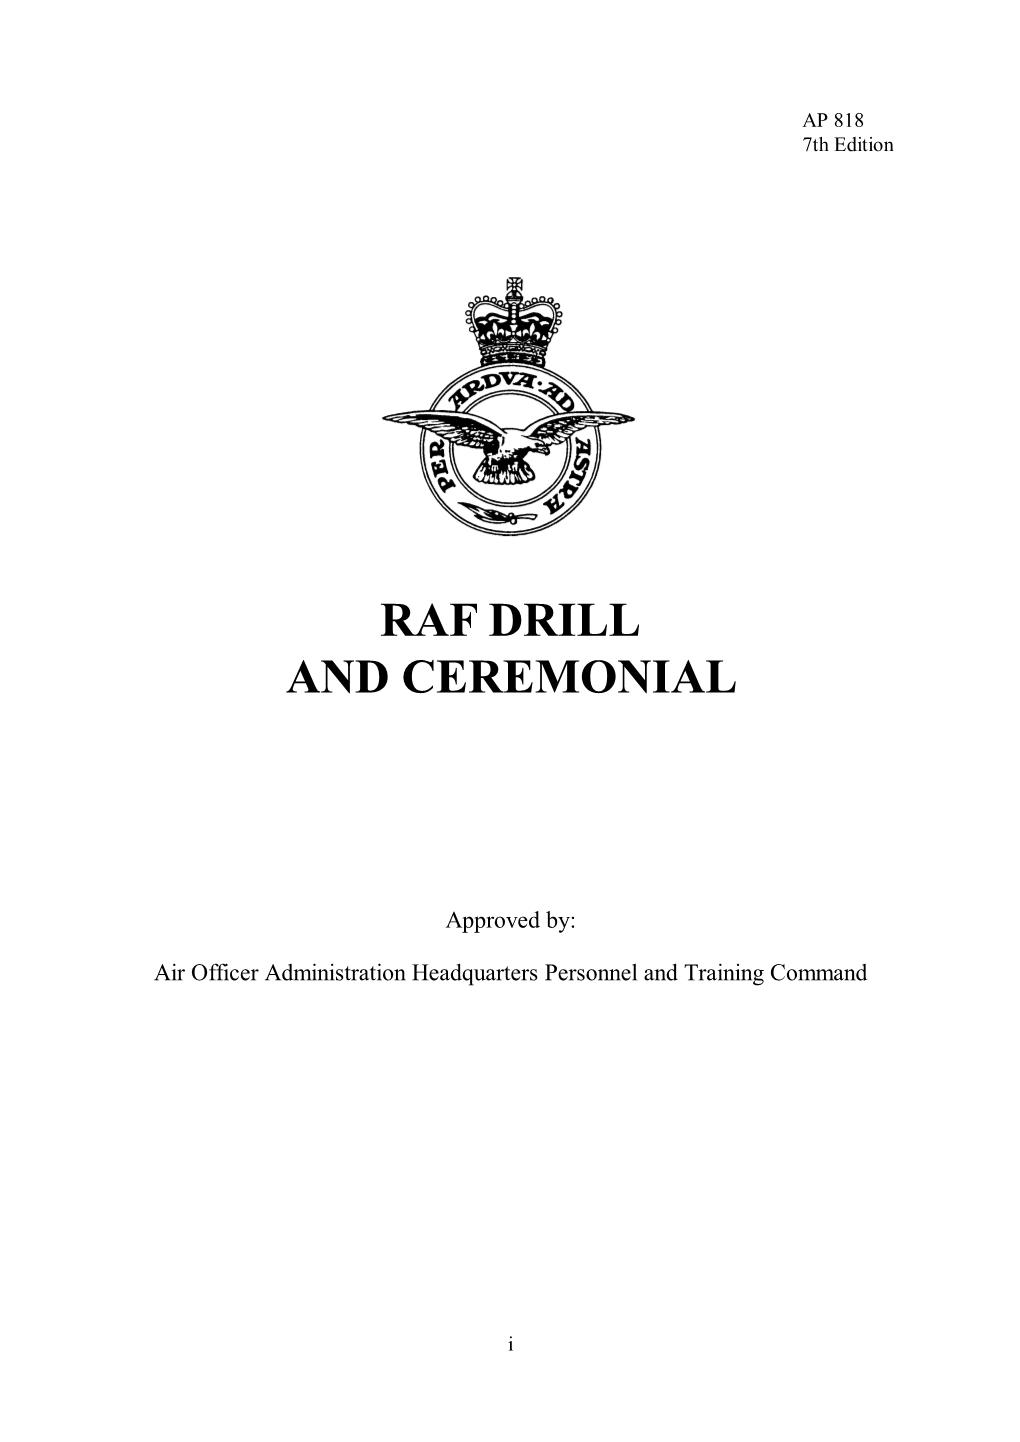 Raf Drill and Ceremonial